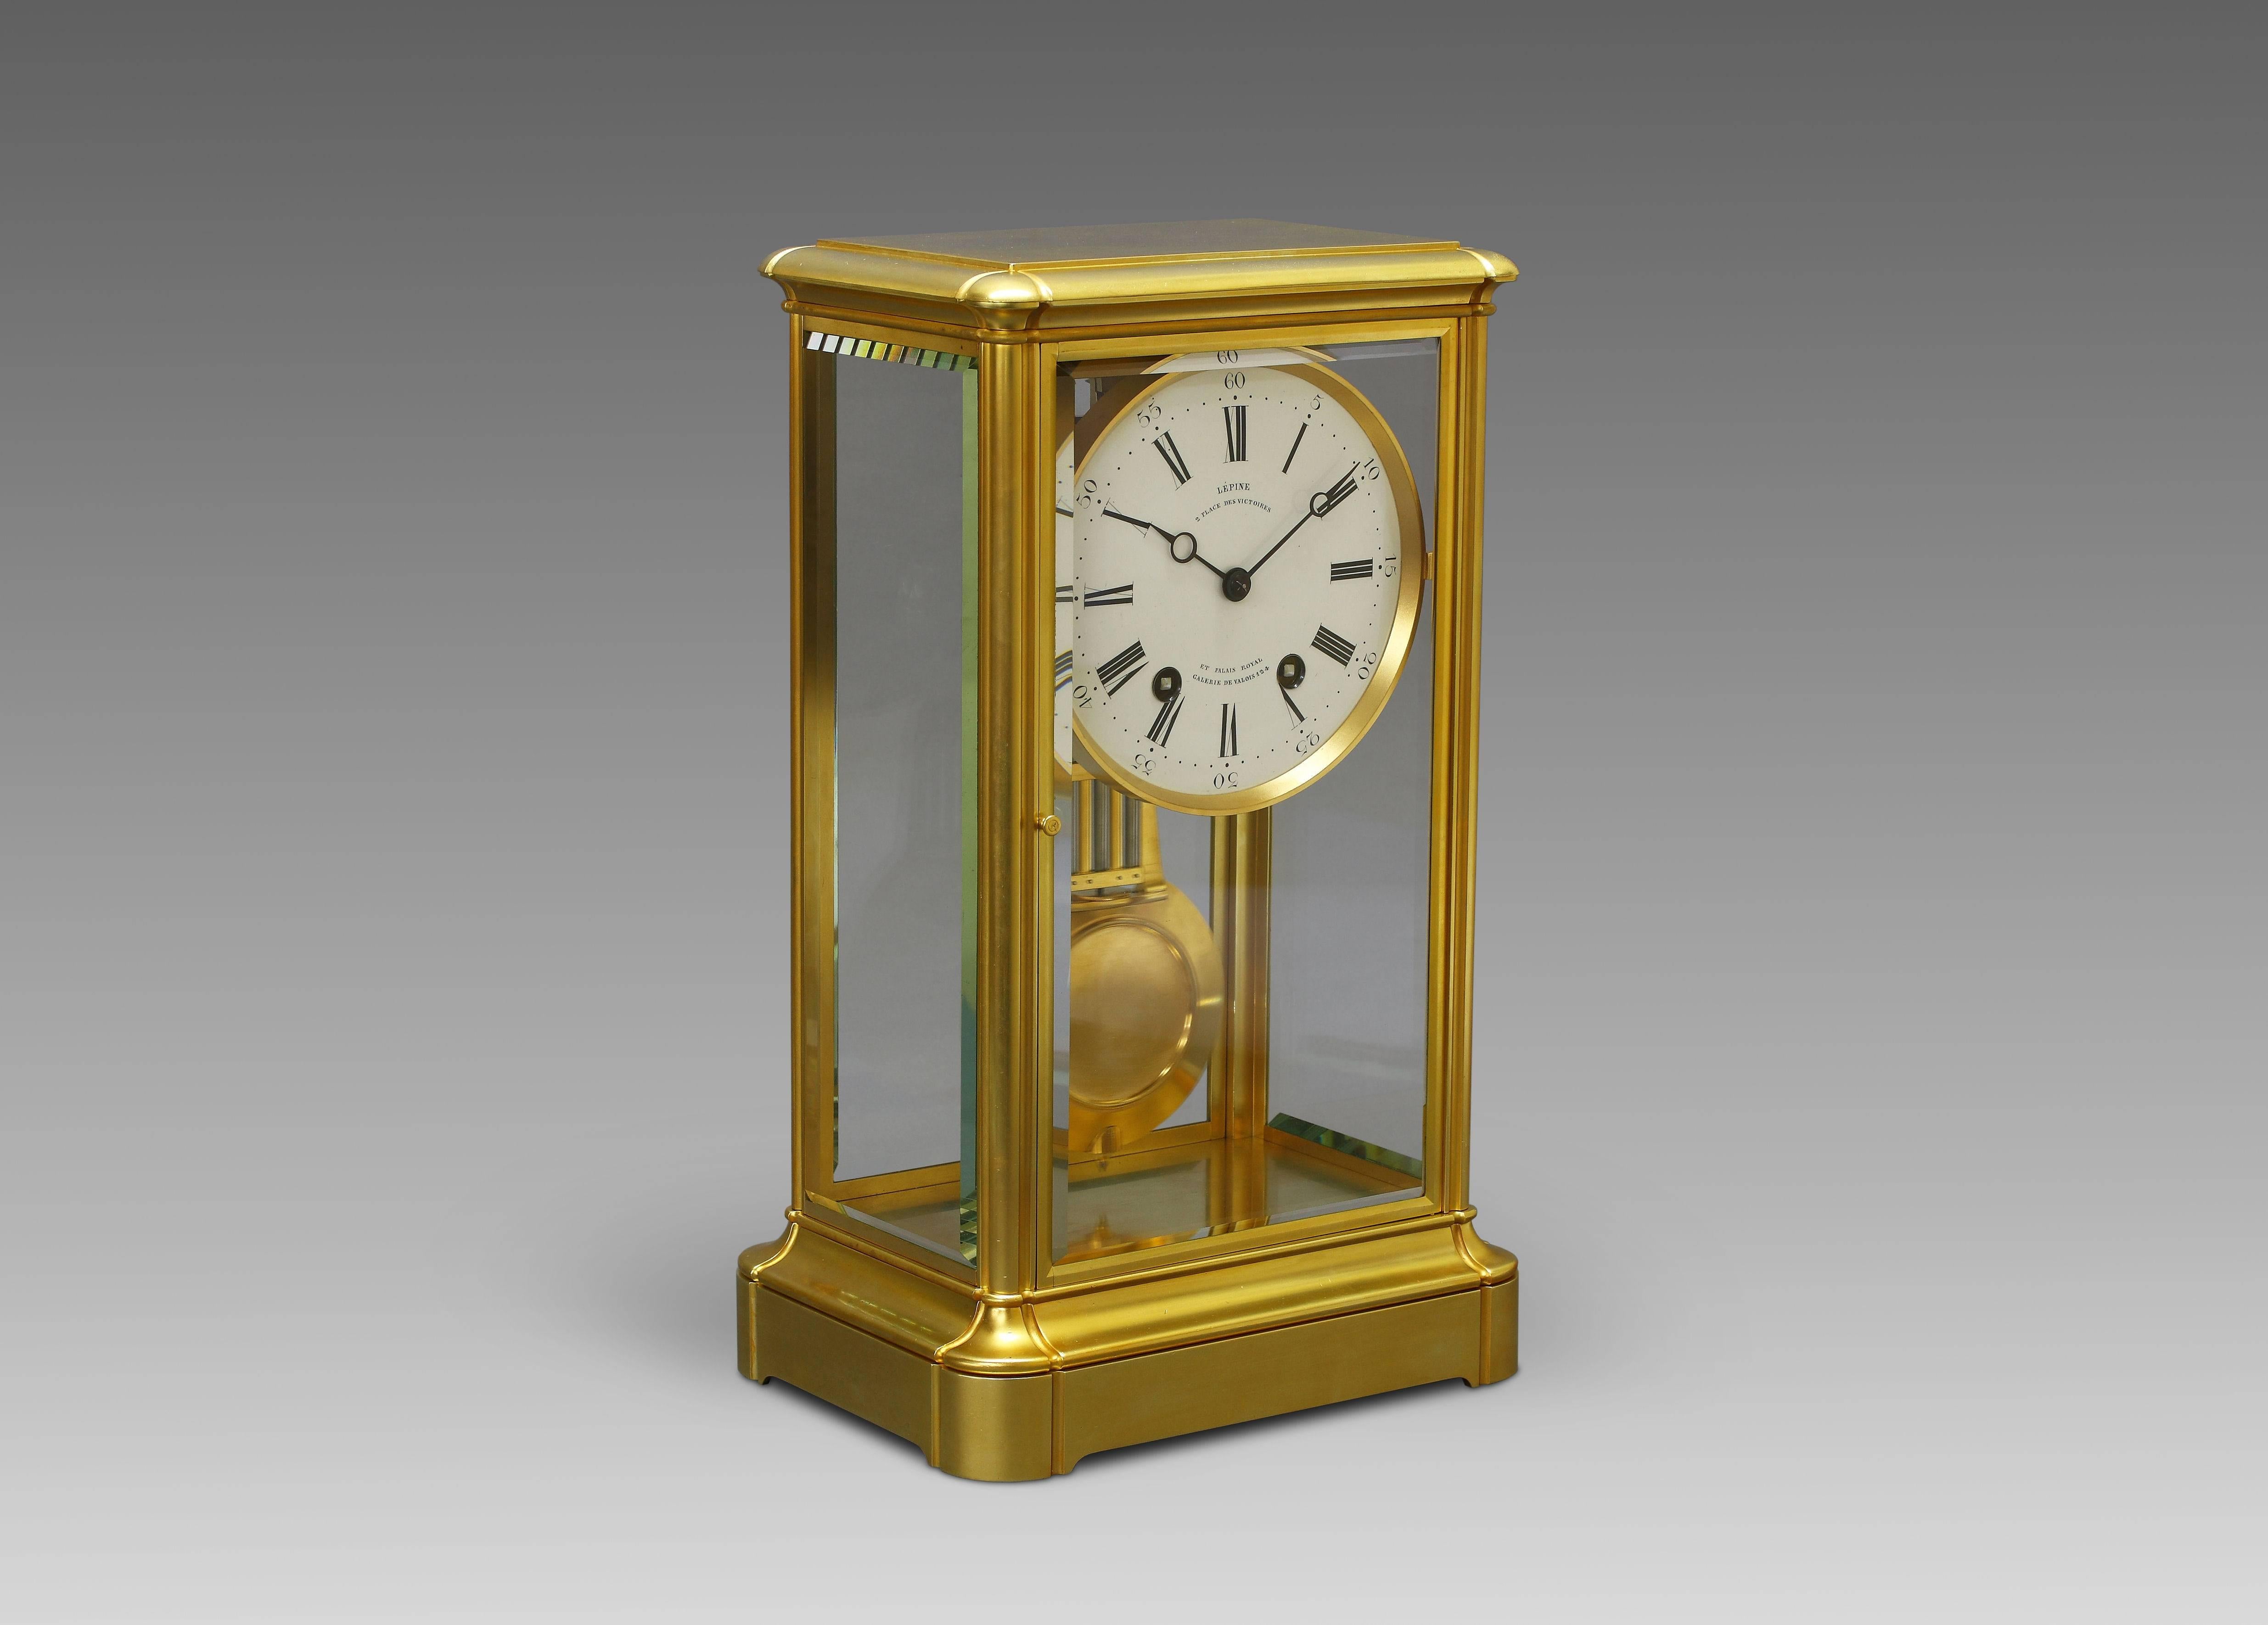 Lépine, 2 place des Victoires et Palais Royal, Galerie de Valois 124.
Louis-Philippe period precision table regulator clock, circa 1840. Movement of exquisite quality, similarly signed Lépine a Paris, and numbered 12831, this number being also